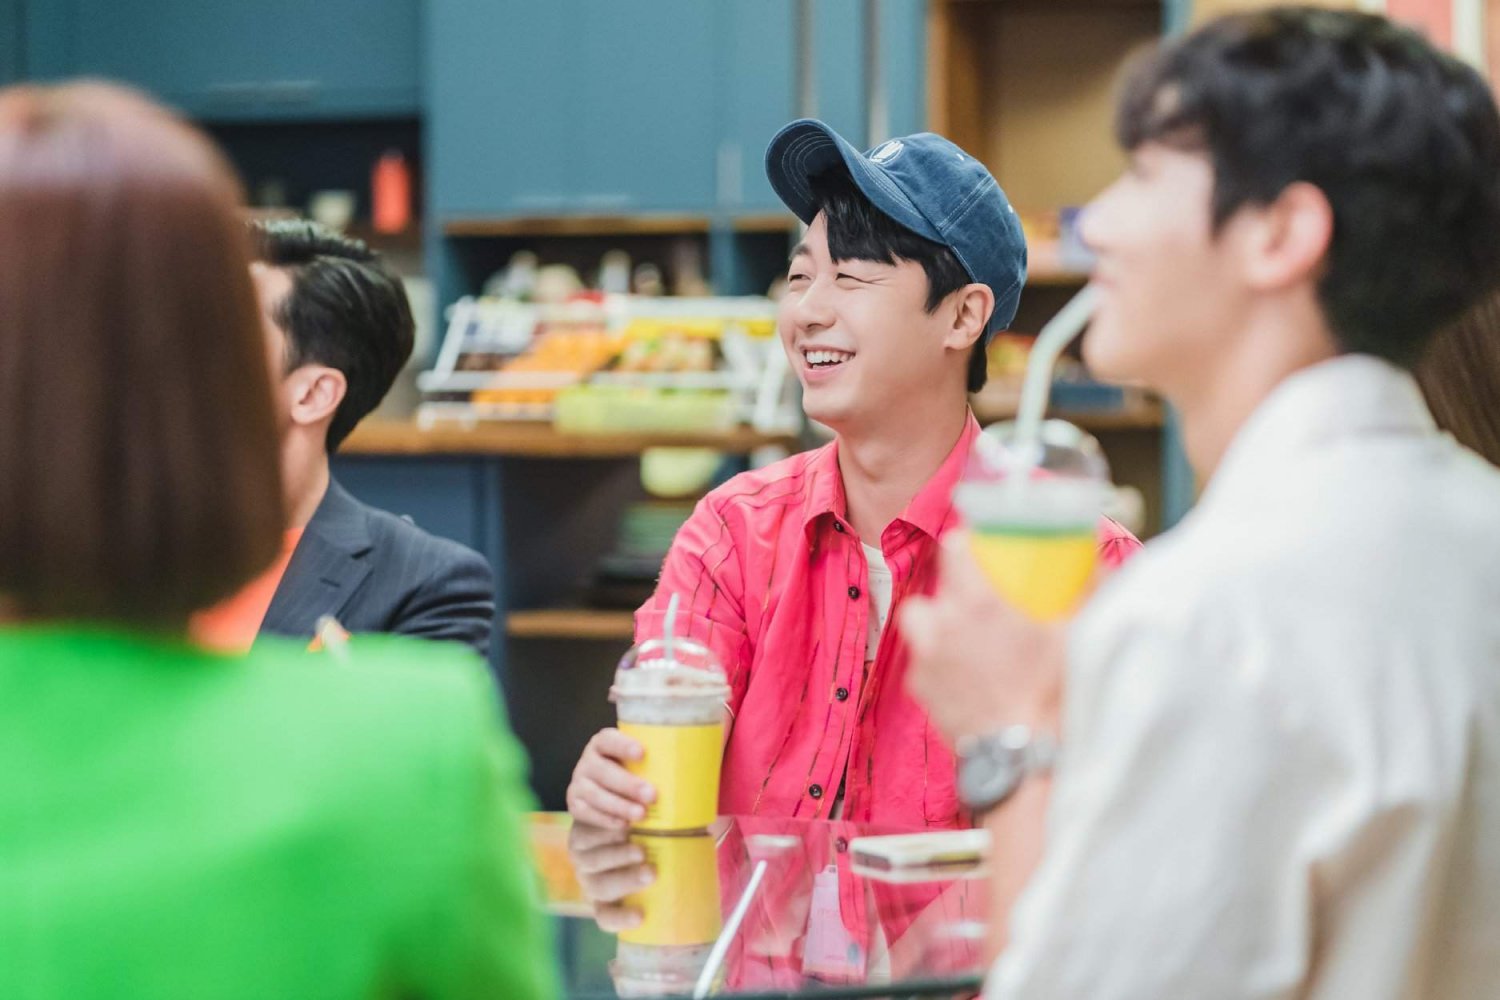 [Photos] New Behind the Scenes Images Added for the Korean Sitcom ...